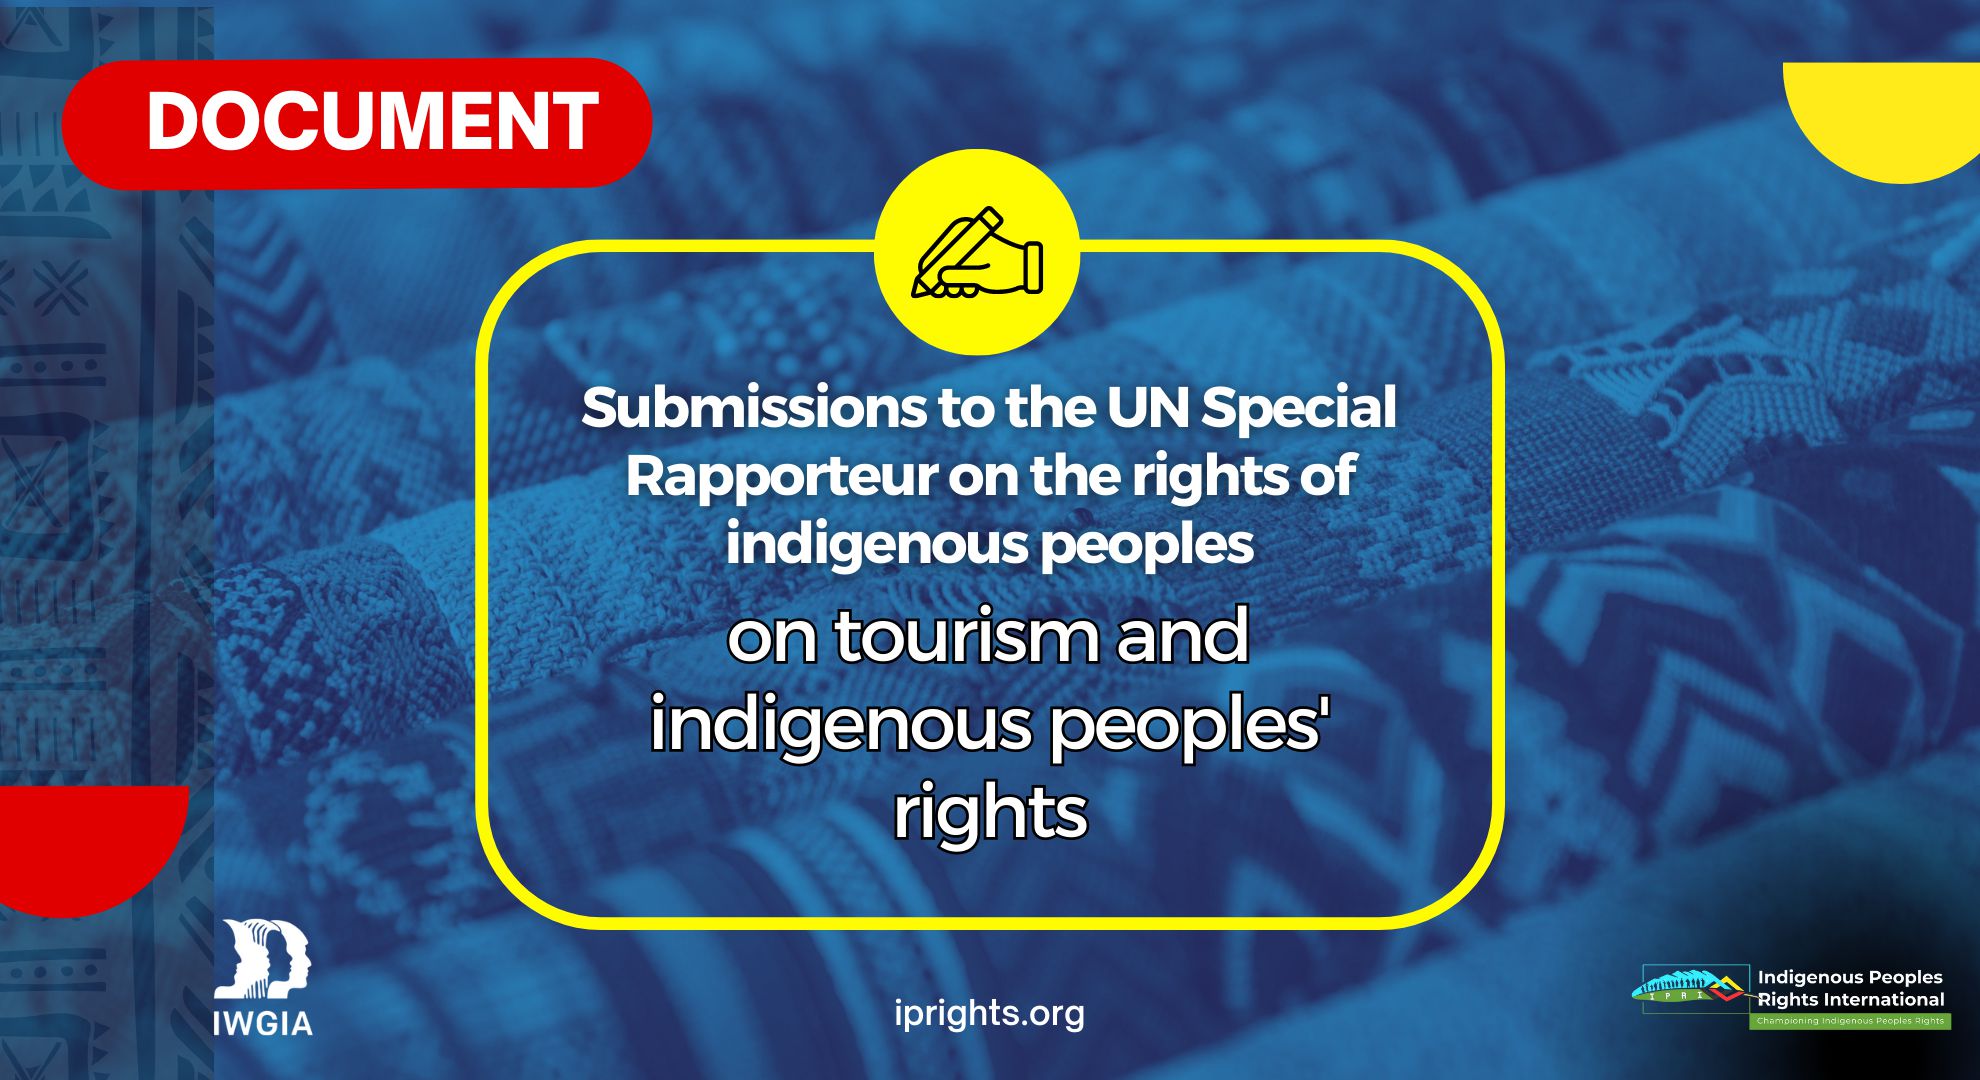 Submissions to the UN Special Rapporteur on the rights of indigenous peoples on tourism and indigenous peoples' rights